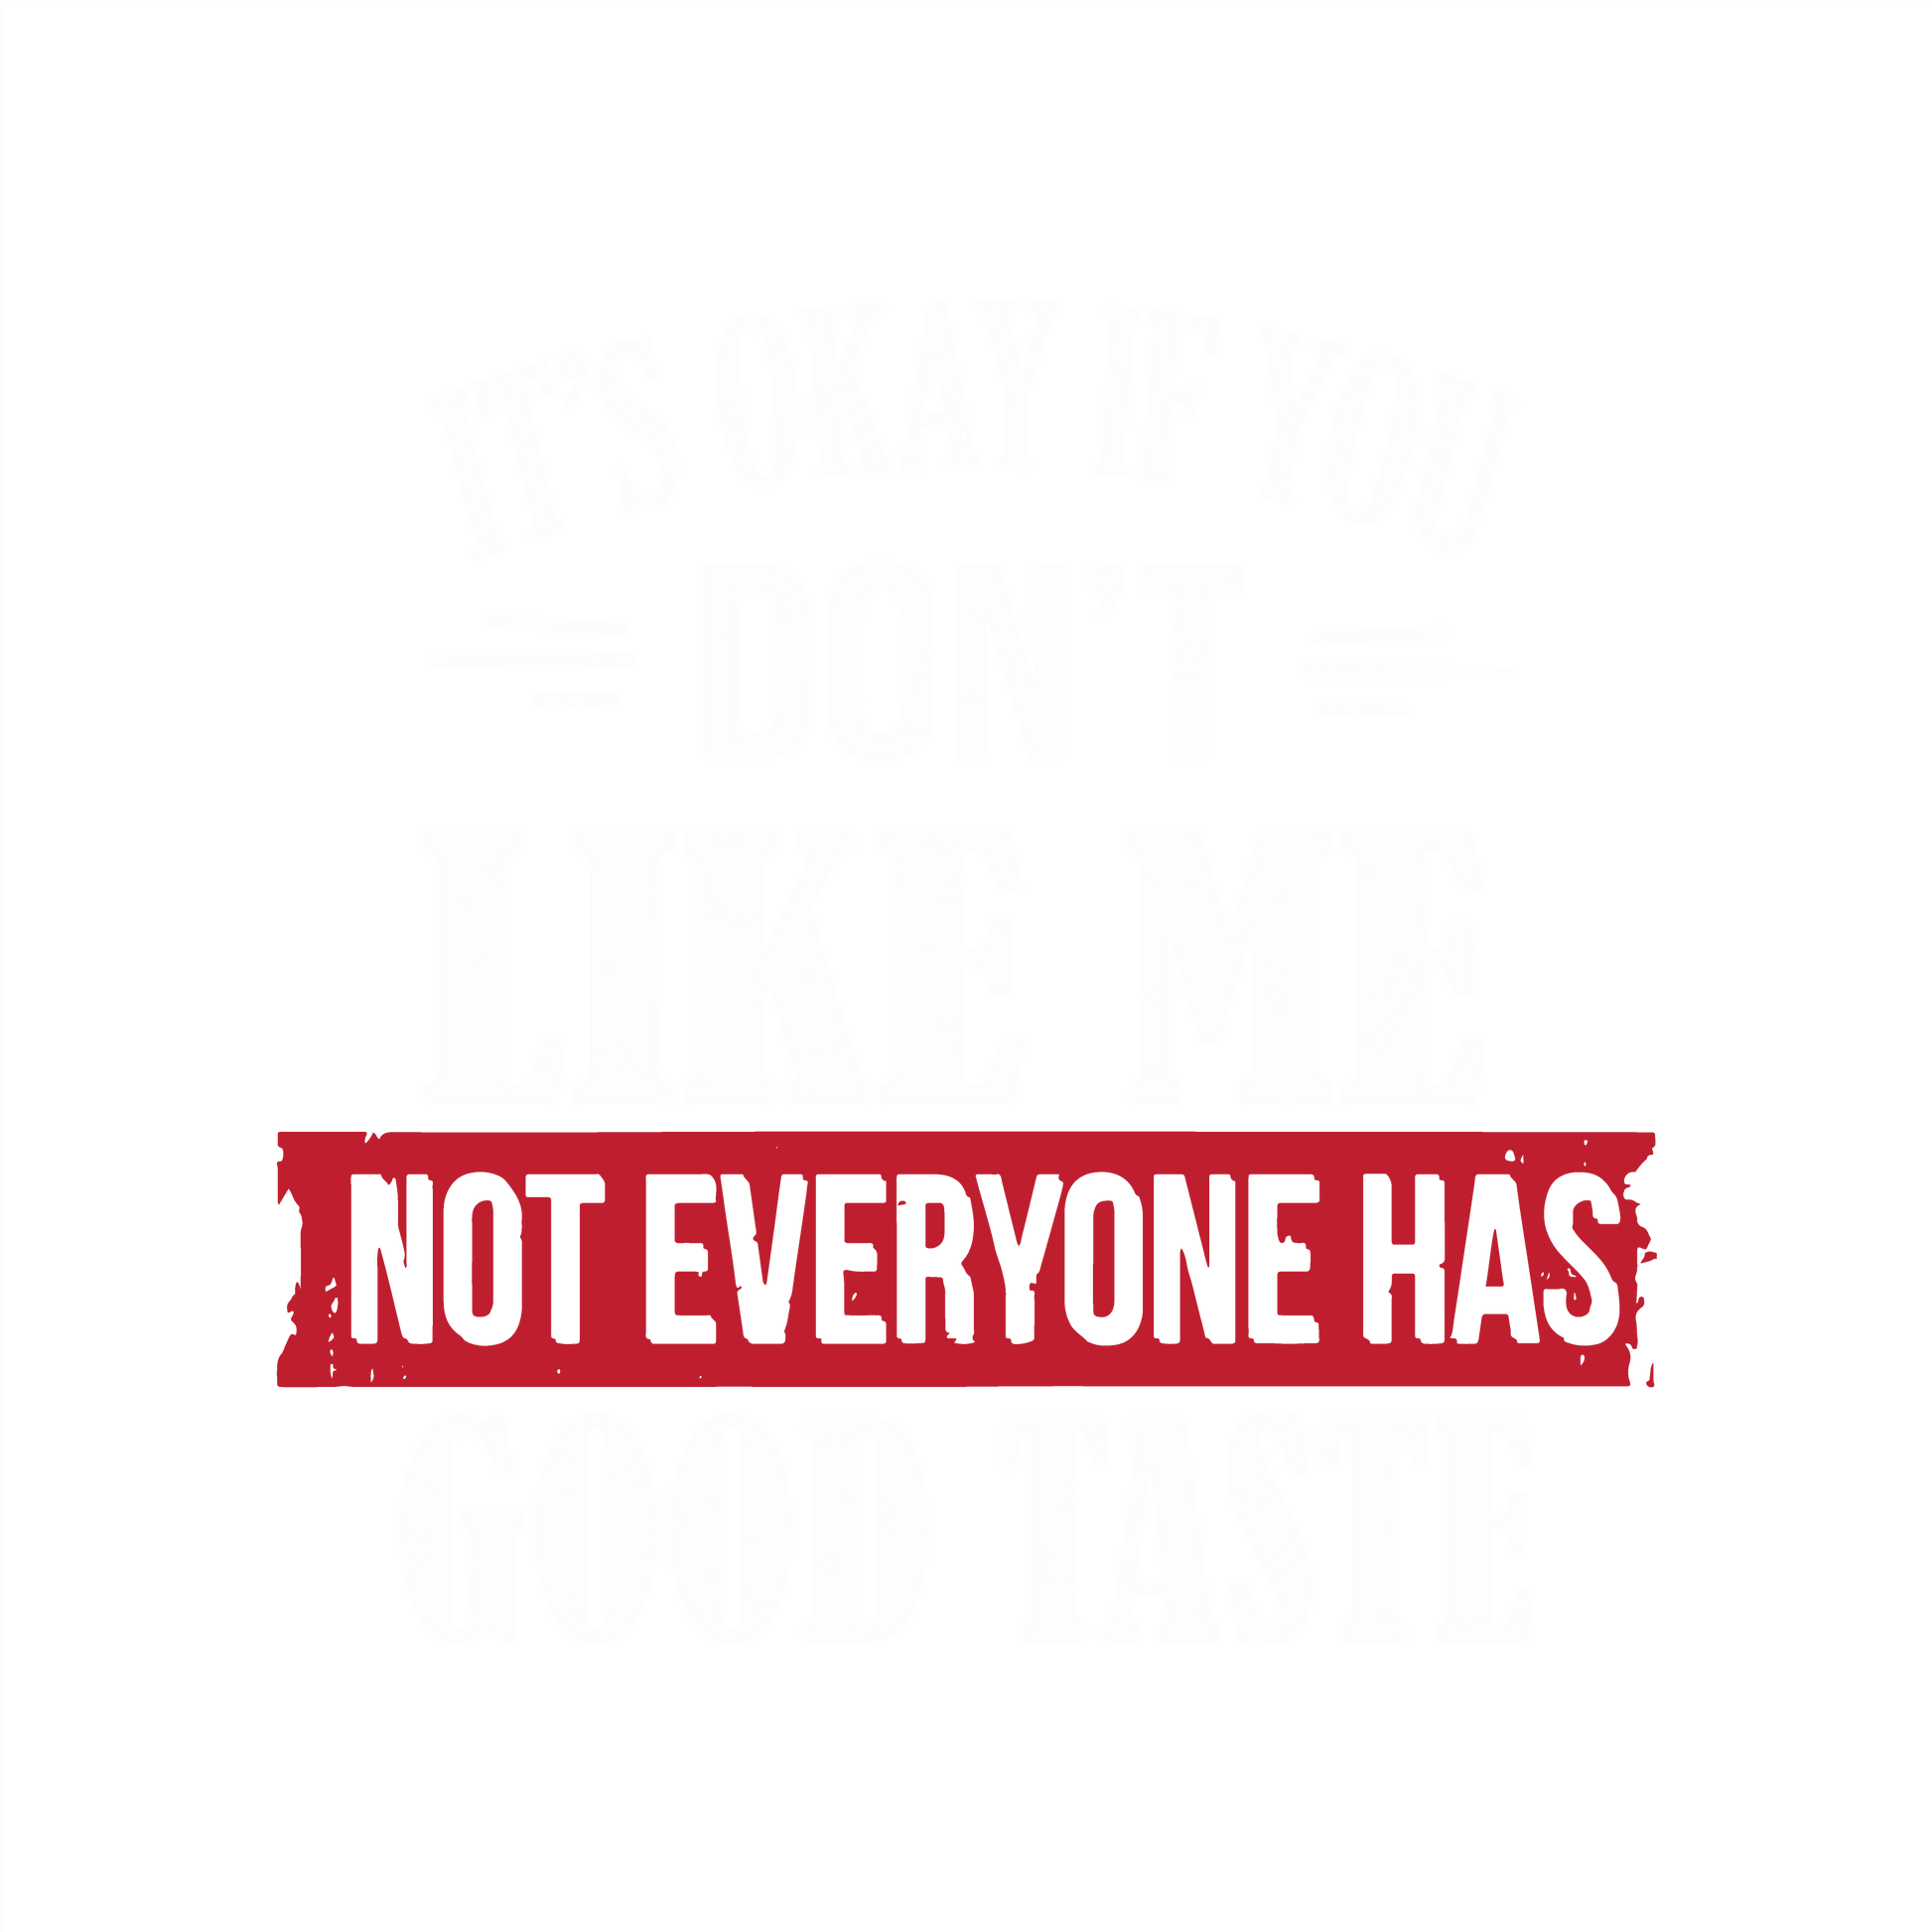 It's Okay If You Don't Like Me Not Everyone Has Good Taste